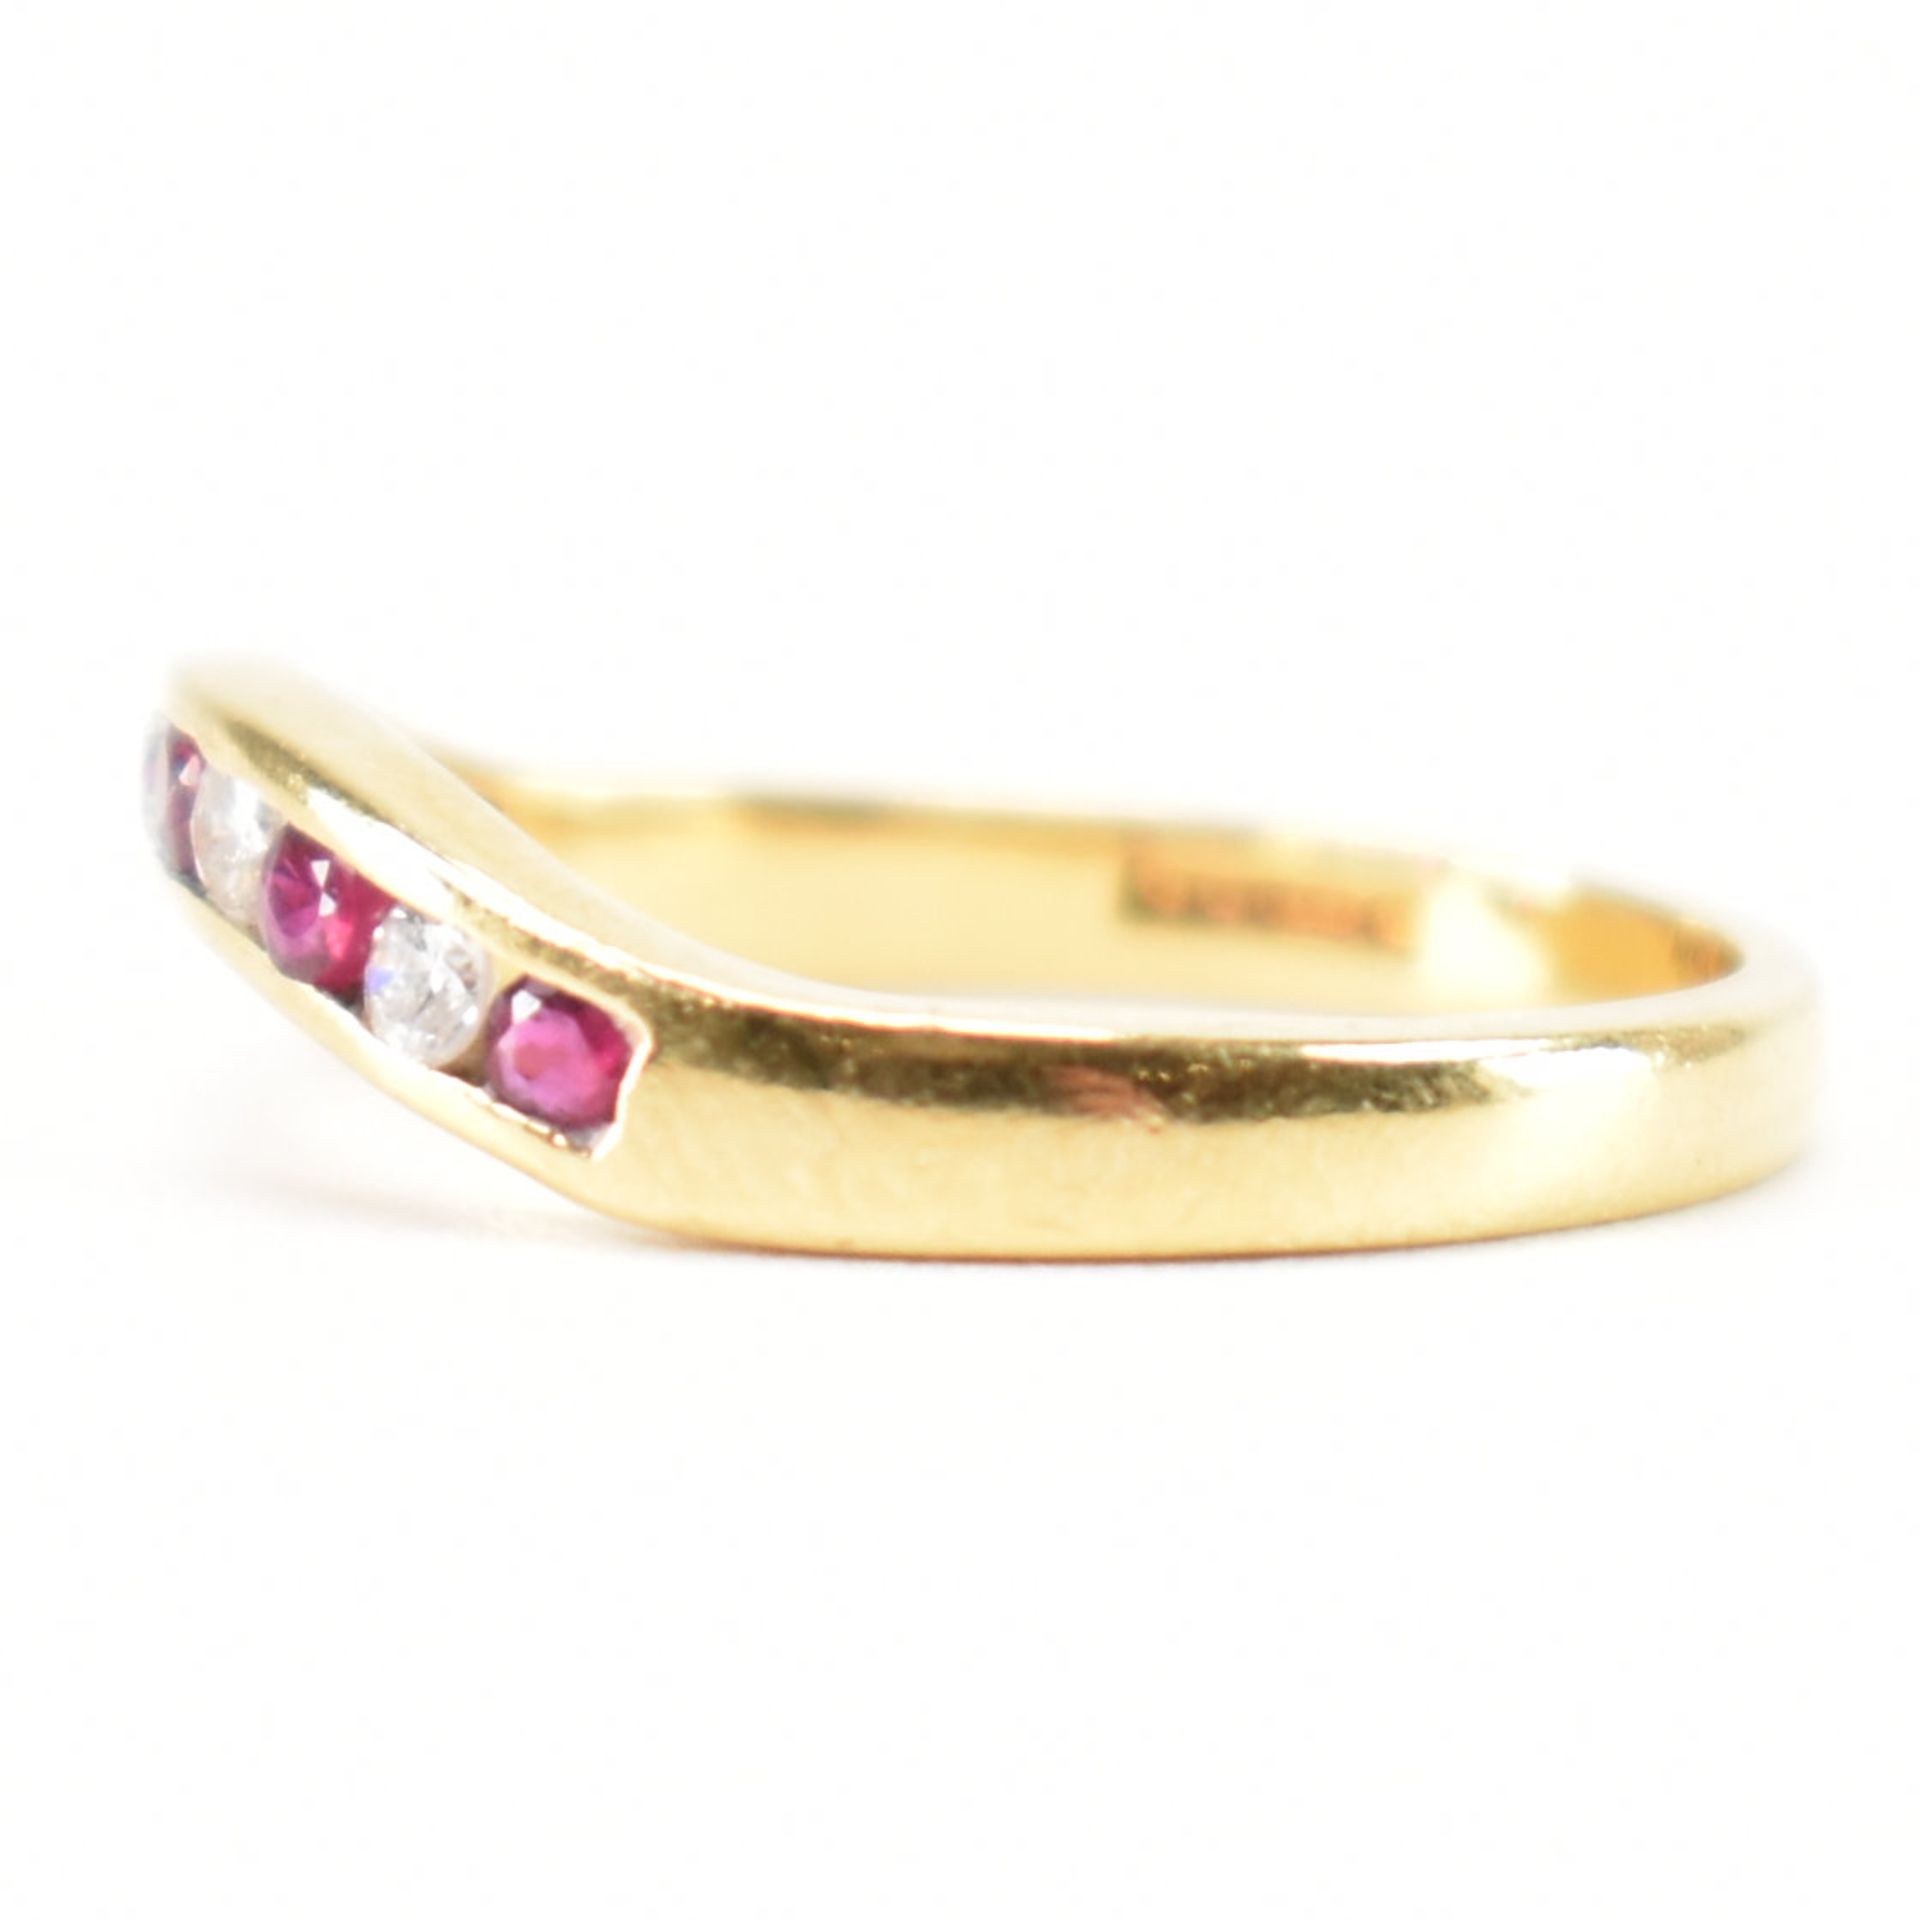 18CT GOLD RUBY & DIAMOND CHANNEL SET RING - Image 2 of 7